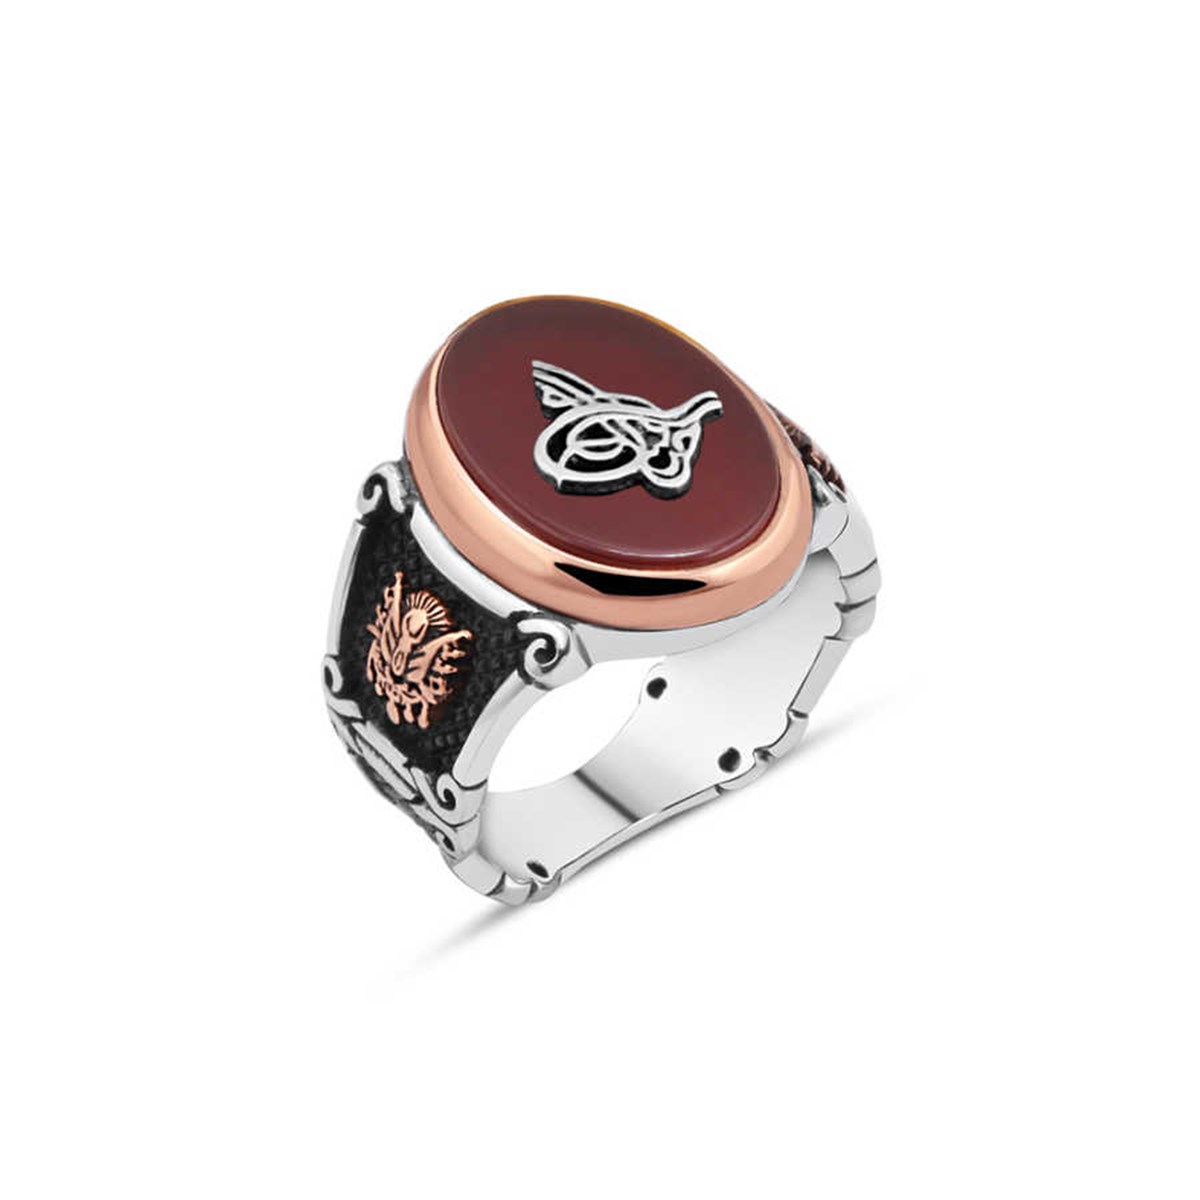 Sterling Silver Men's Ring On Agate Stone